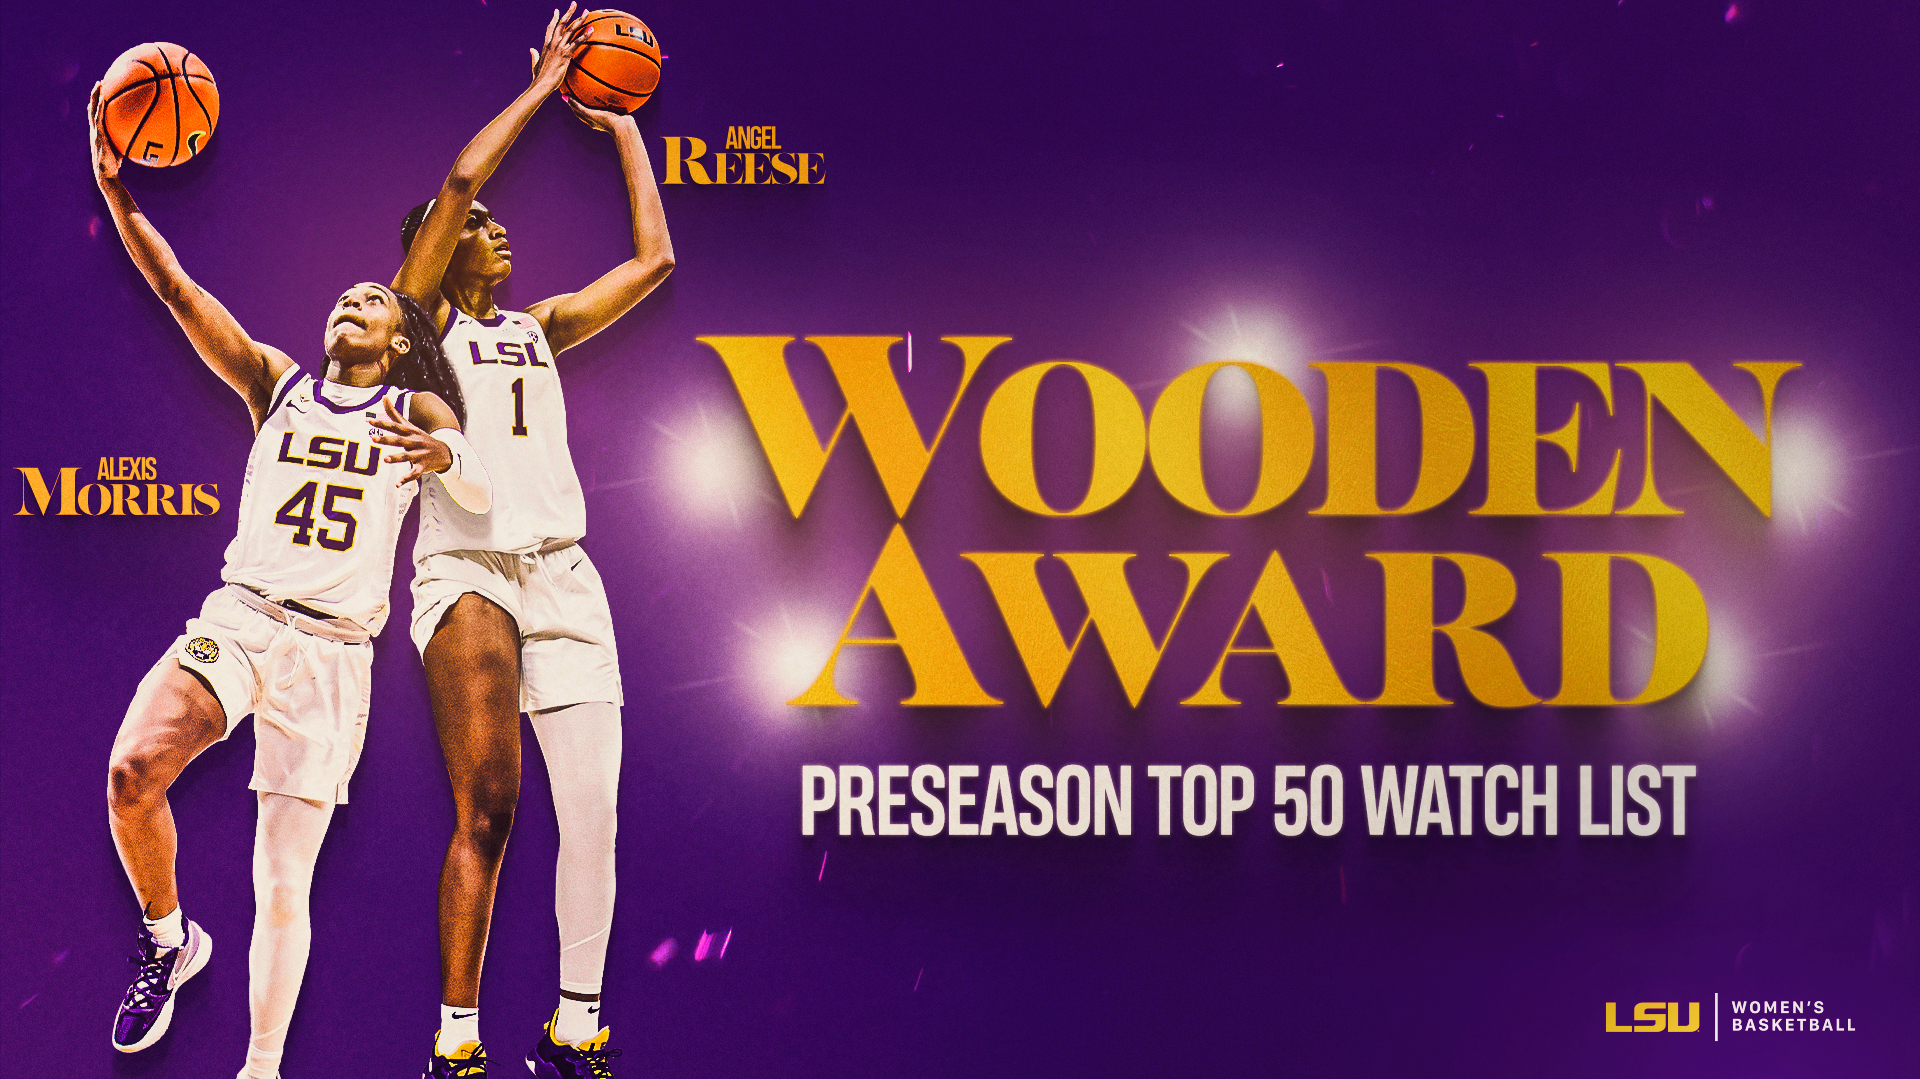 Lsu S Morris And Reese Named To Wooden Award Watch List